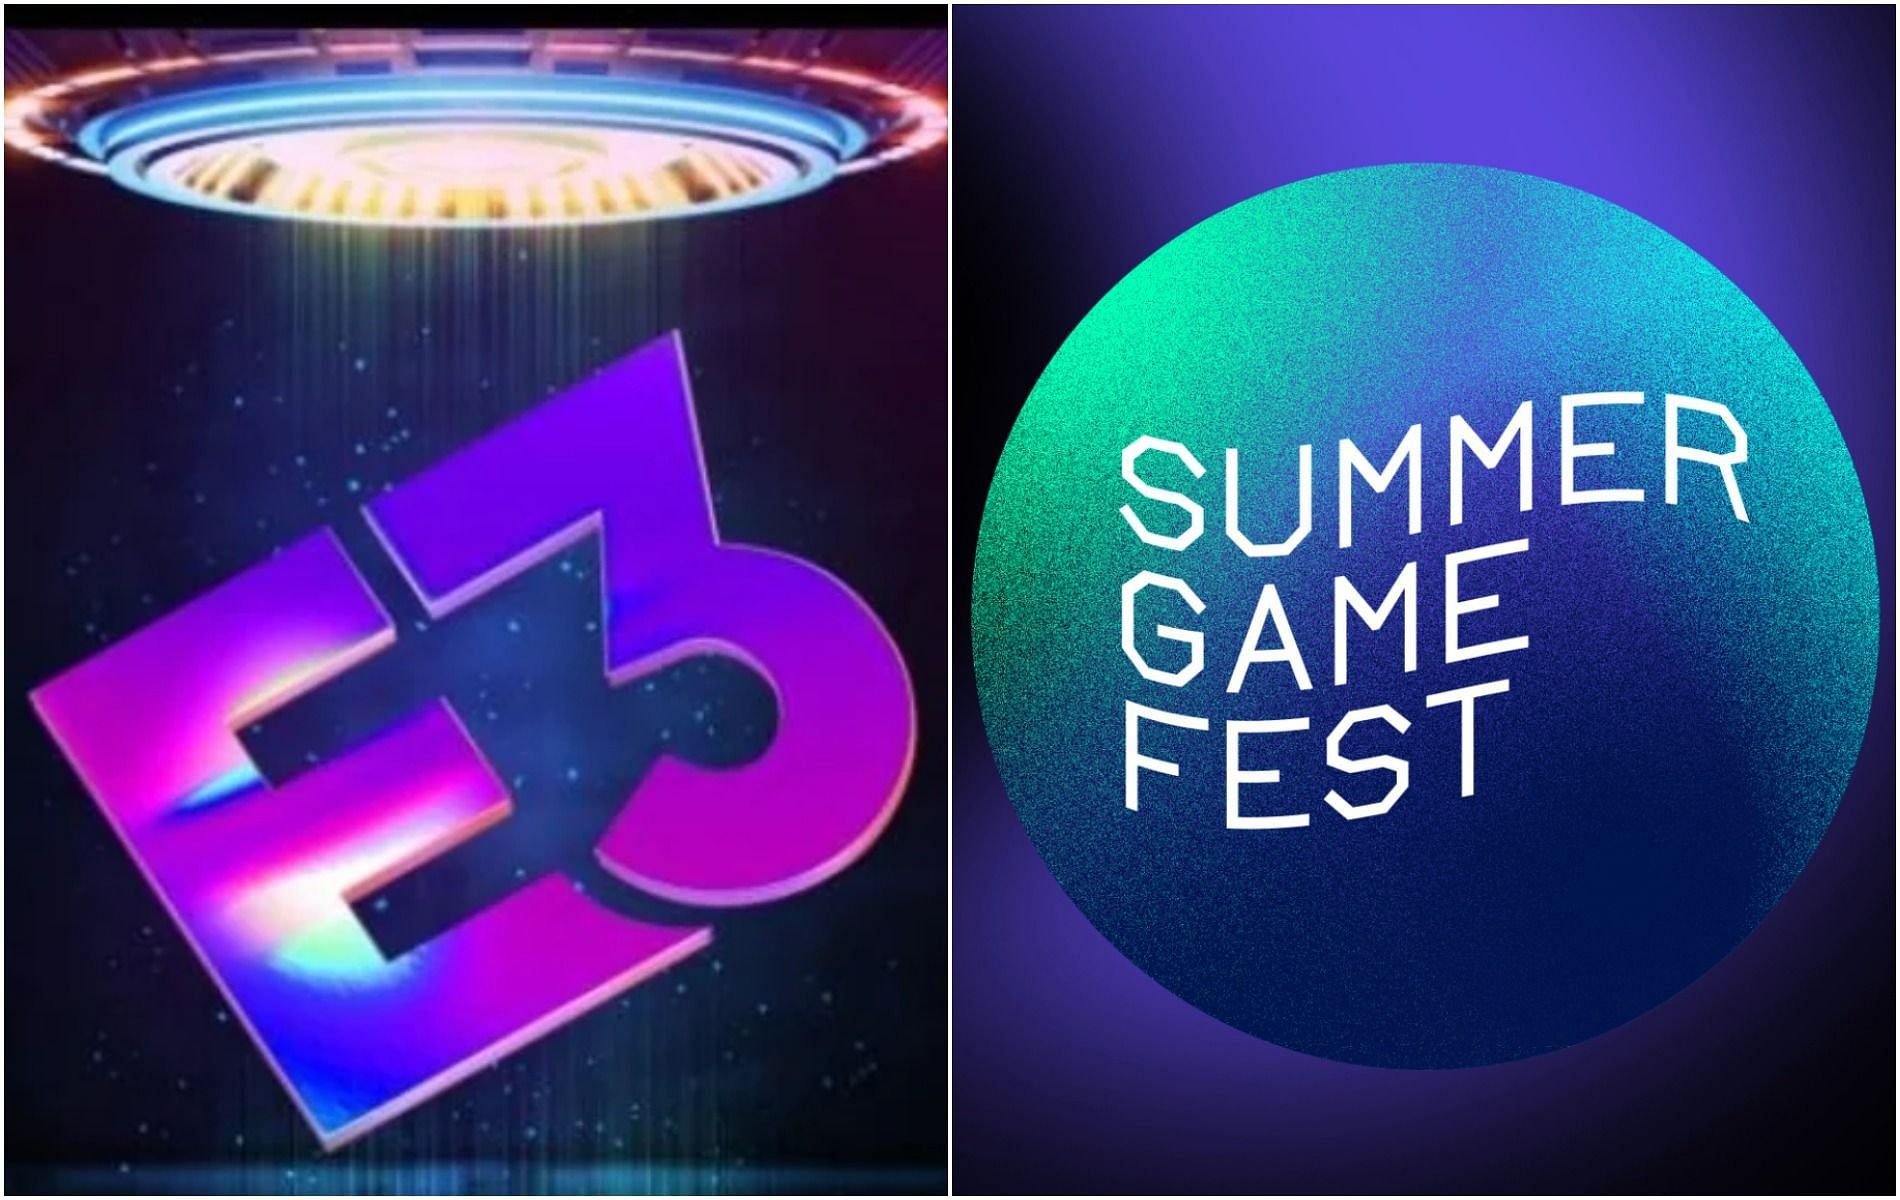 Electronic Entertainment Expo 2022 is canceled and Summer Game Fest 2022 is shaping to be the big event of this summer (Images by ESA and SGF)